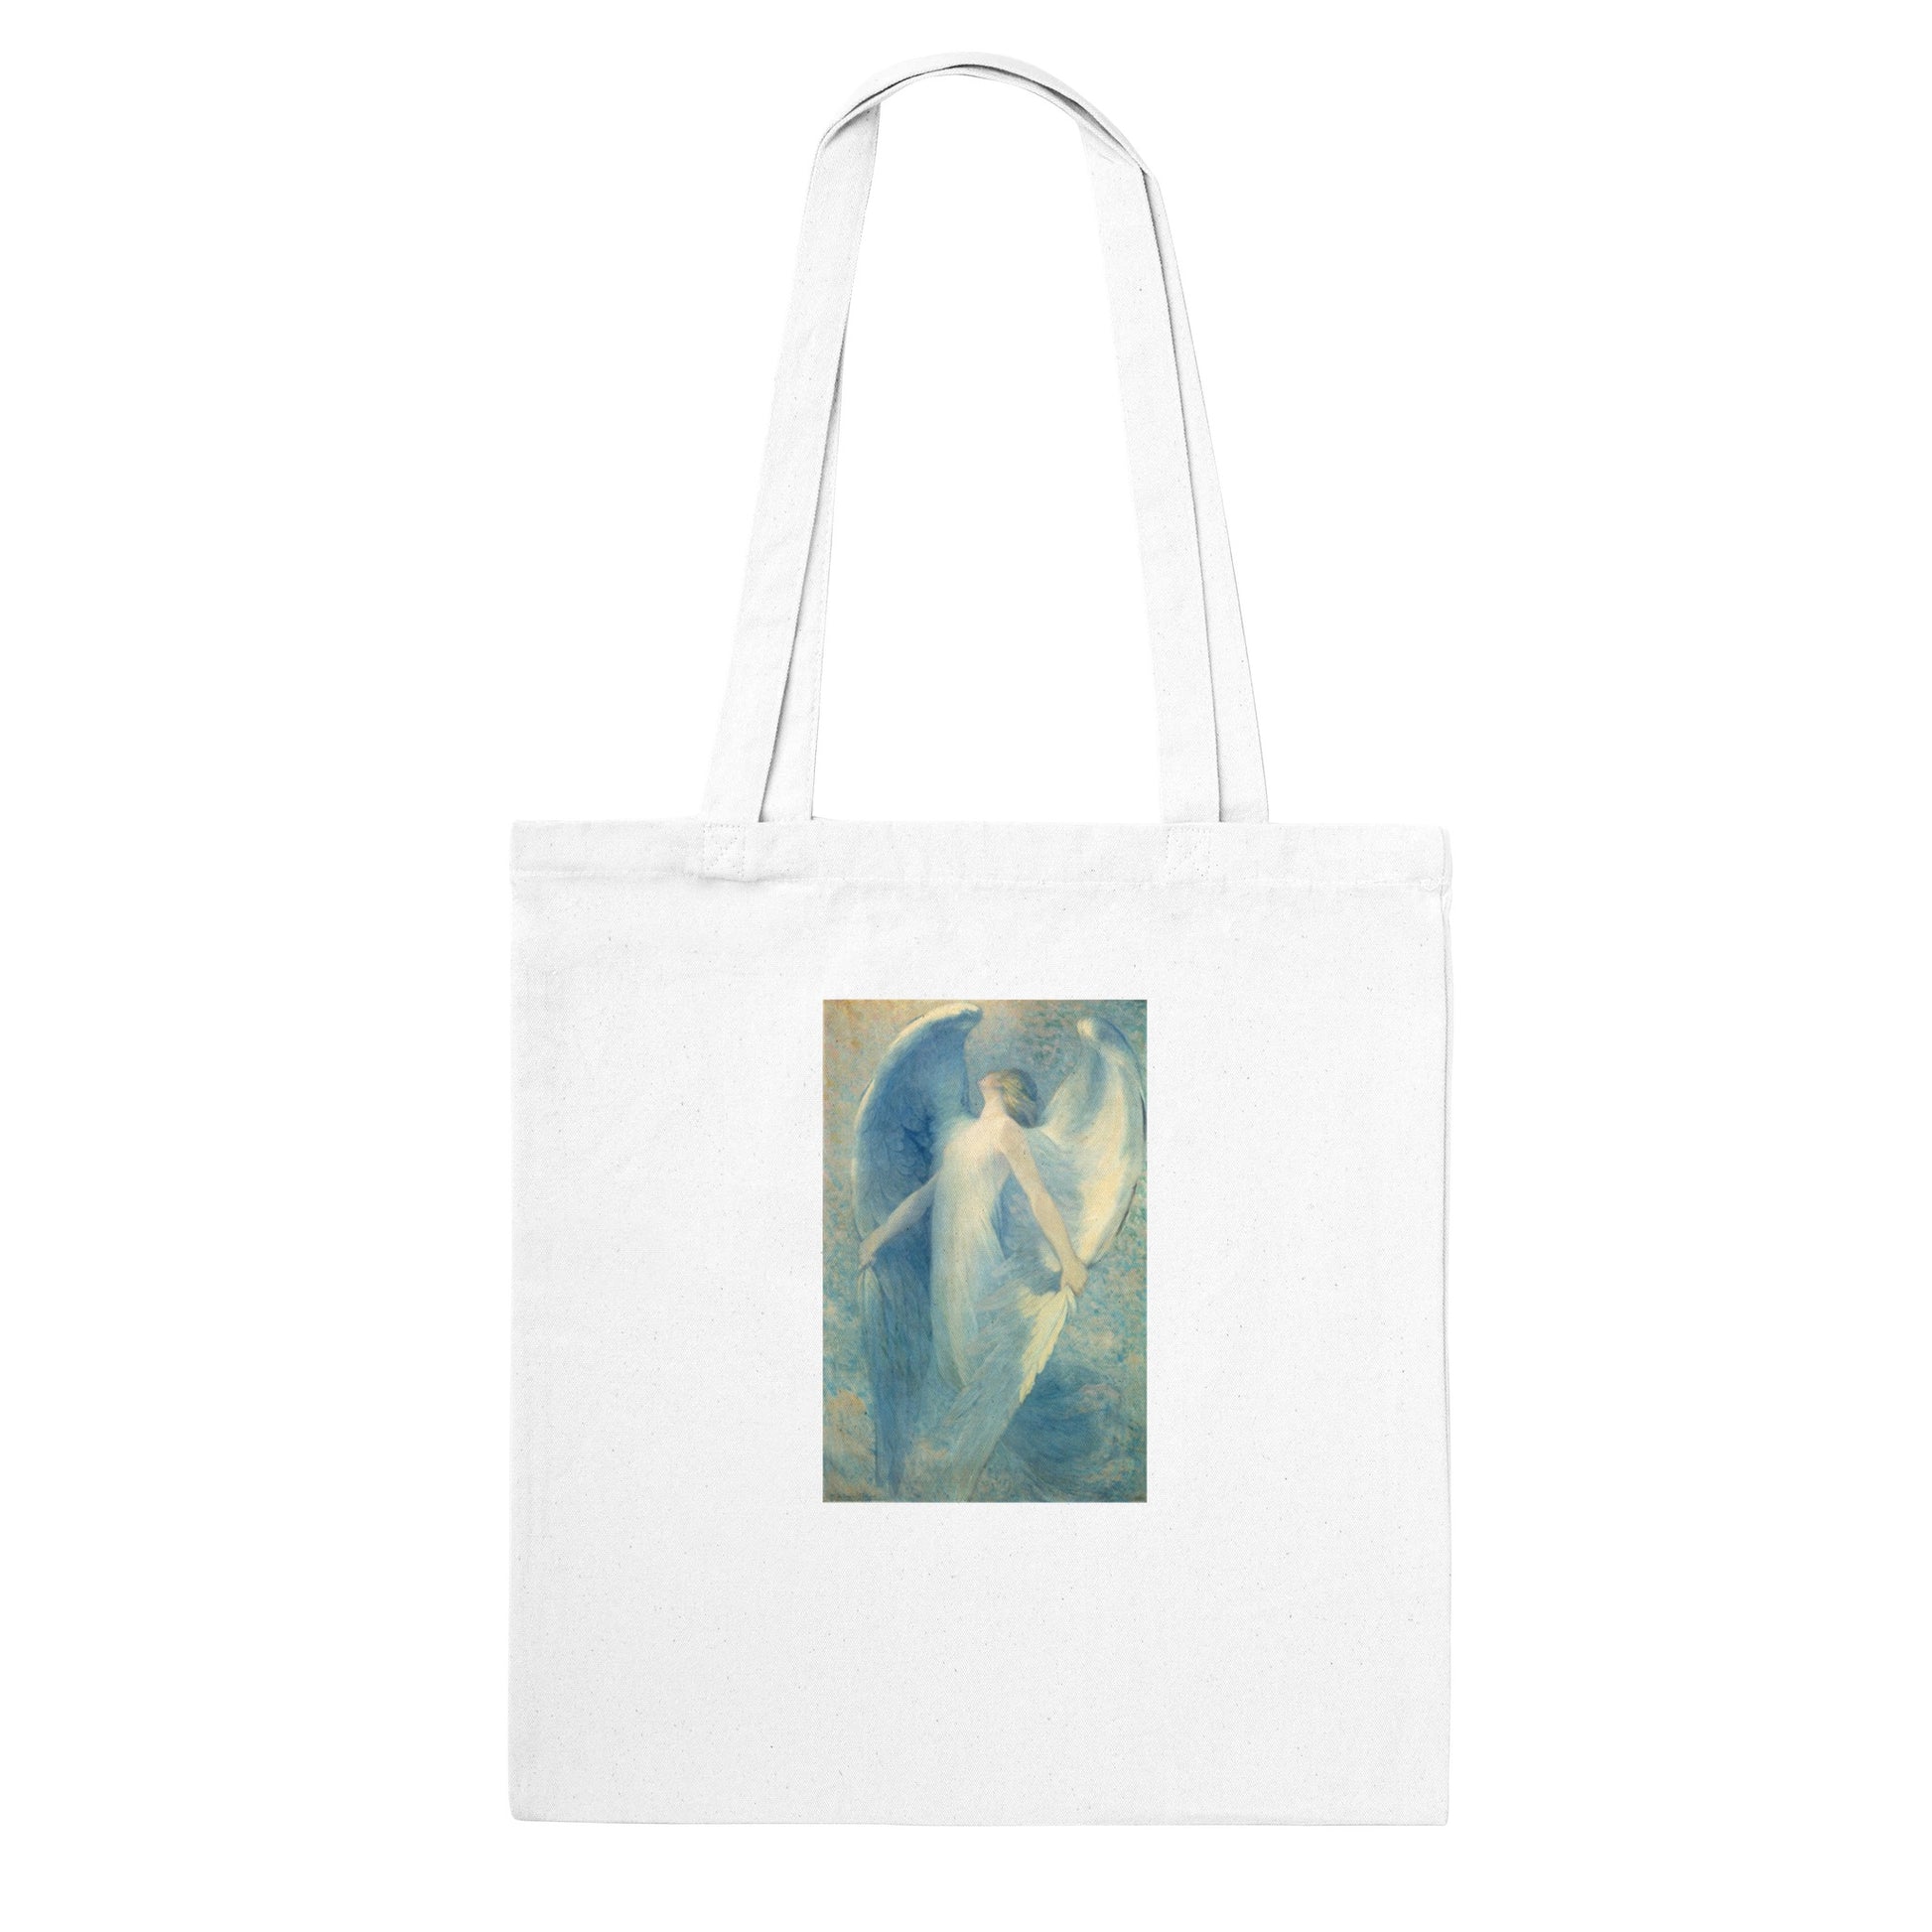 WILLIAM BAXTER CLOSSON - THE ANGEL - CLASSIC TOTE BAG 